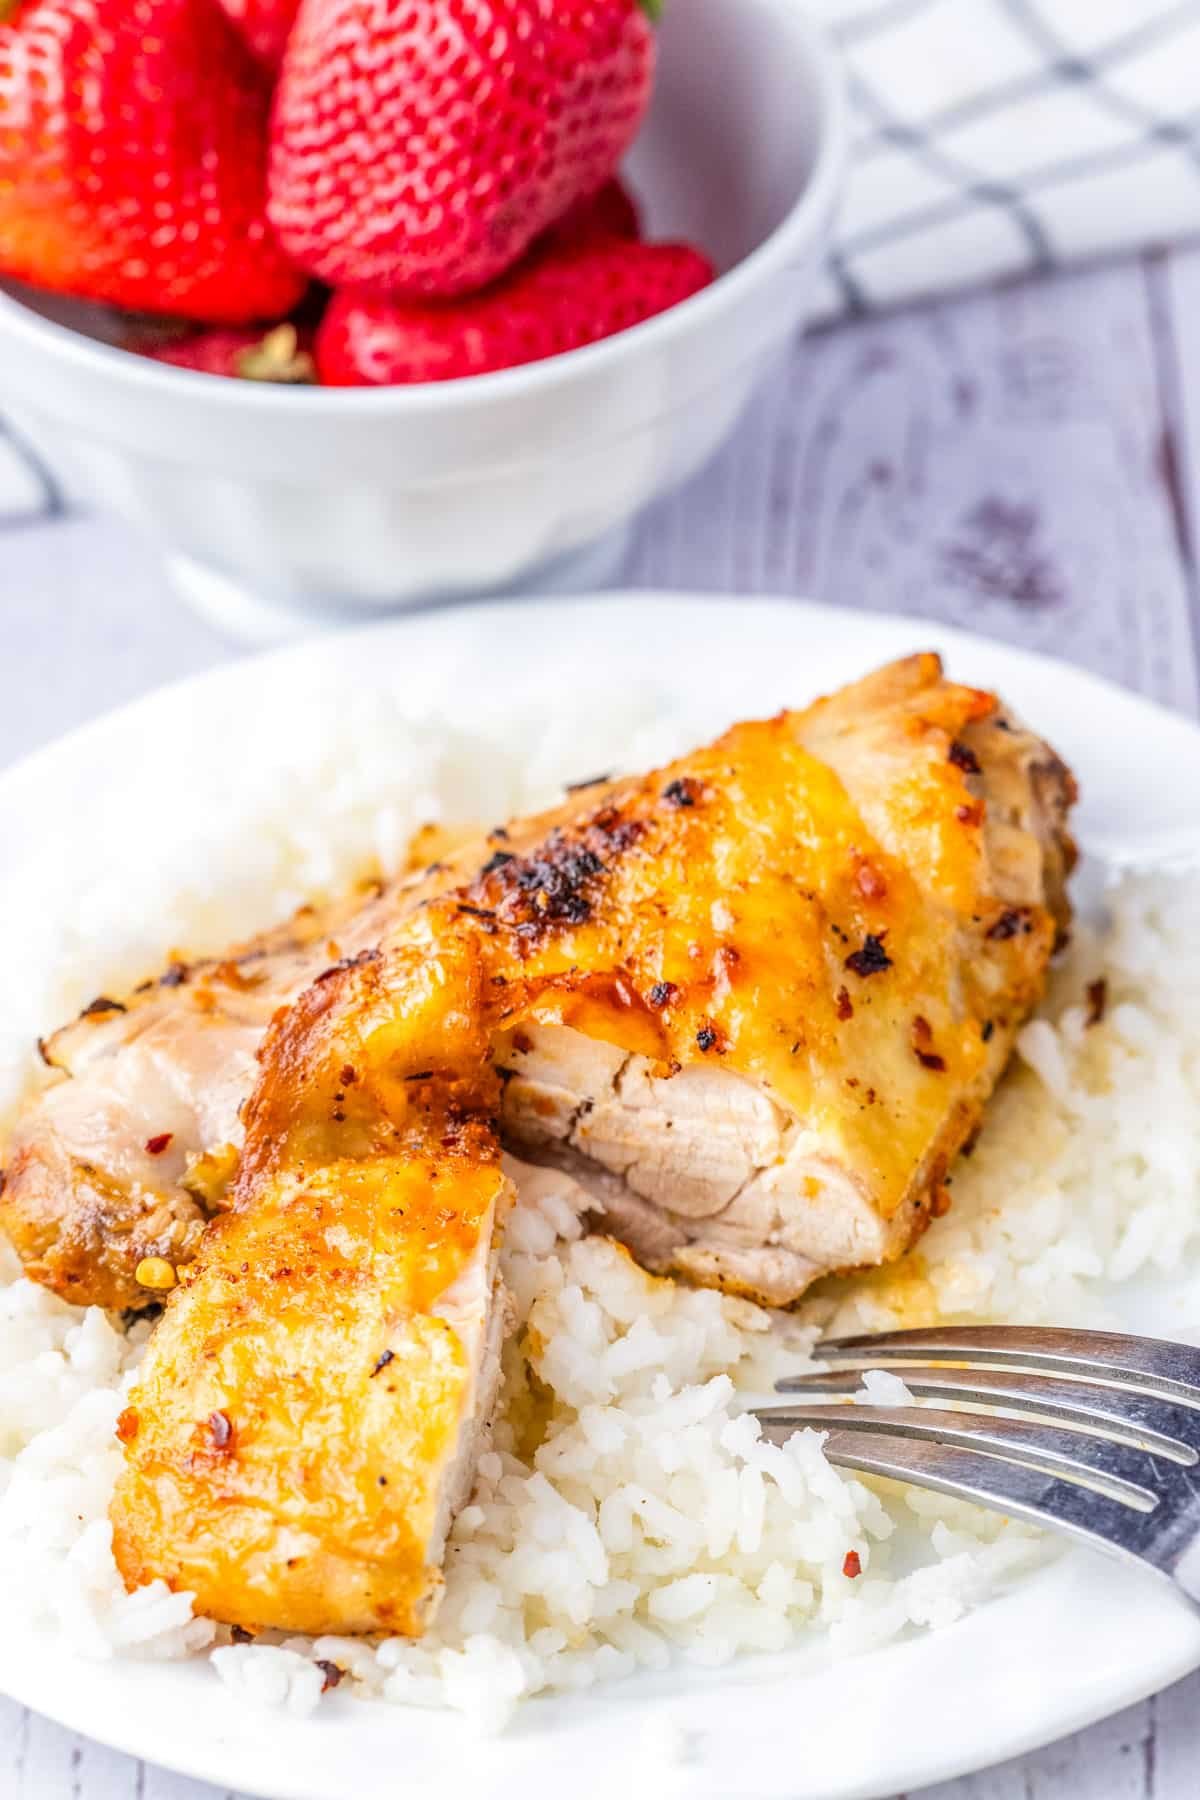 An Air Fryer Chicken Thighs cut into so you can see what the inside looks like.